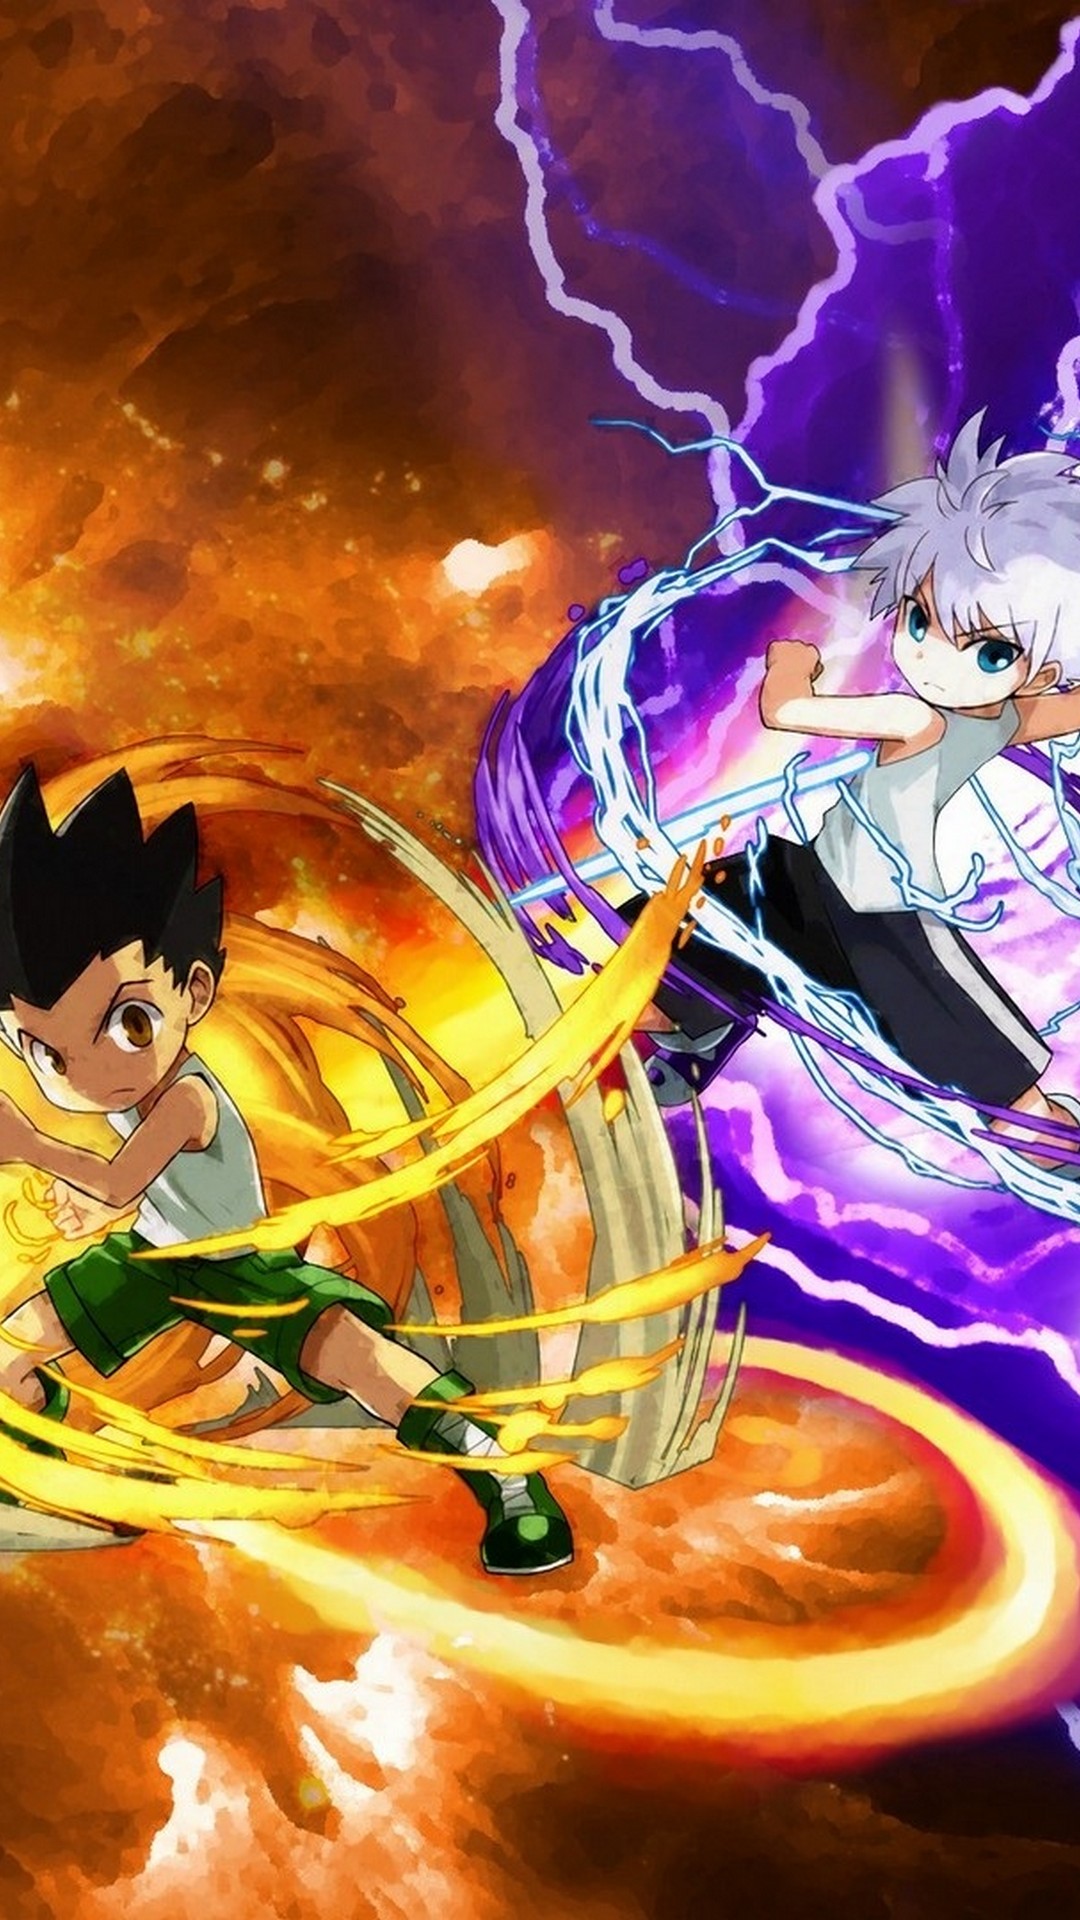 Gon And Killua Wallpaper Android with high-resolution 1080x1920 pixel. You can use this wallpaper for your Android backgrounds, Tablet, Samsung Screensavers, Mobile Phone Lock Screen and another Smartphones device